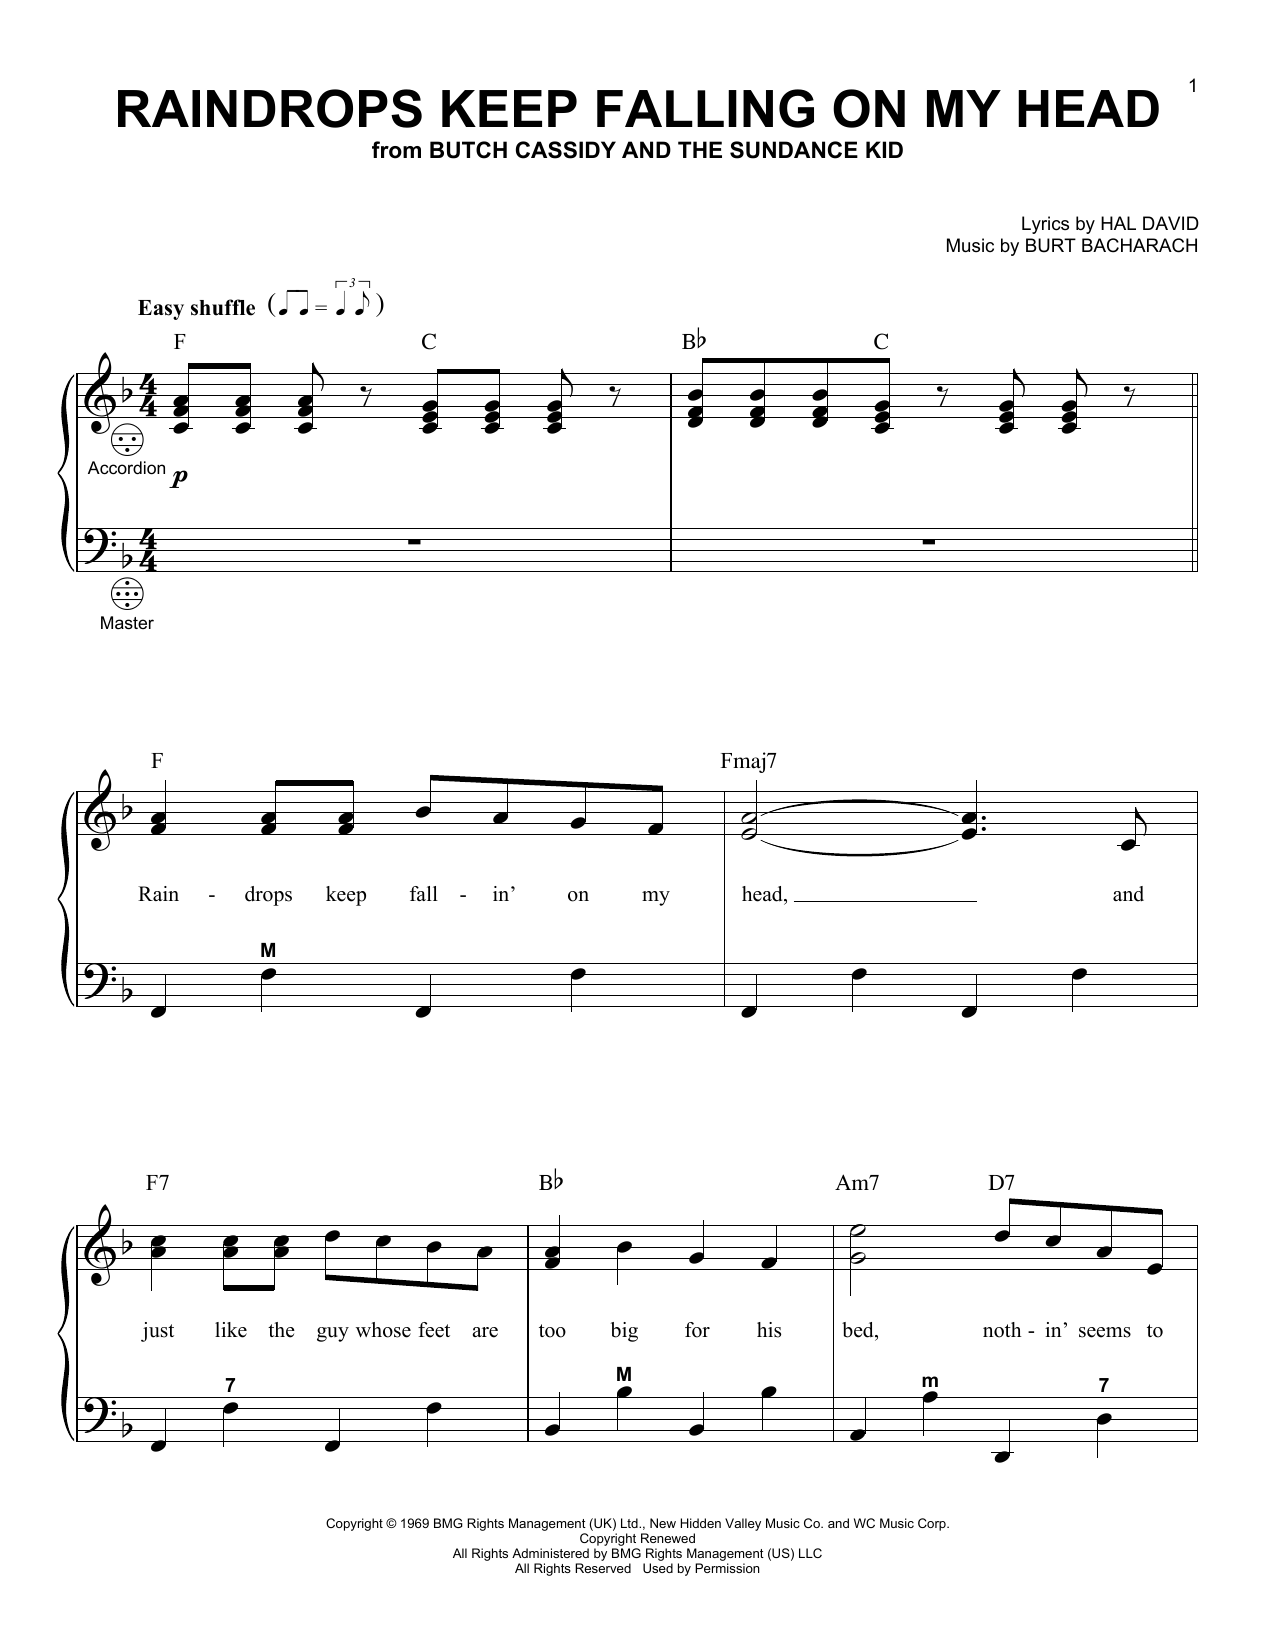 B.J. Thomas Raindrops Keep Fallin' On My Head sheet music preview music notes and score for Ukulele including 3 page(s)